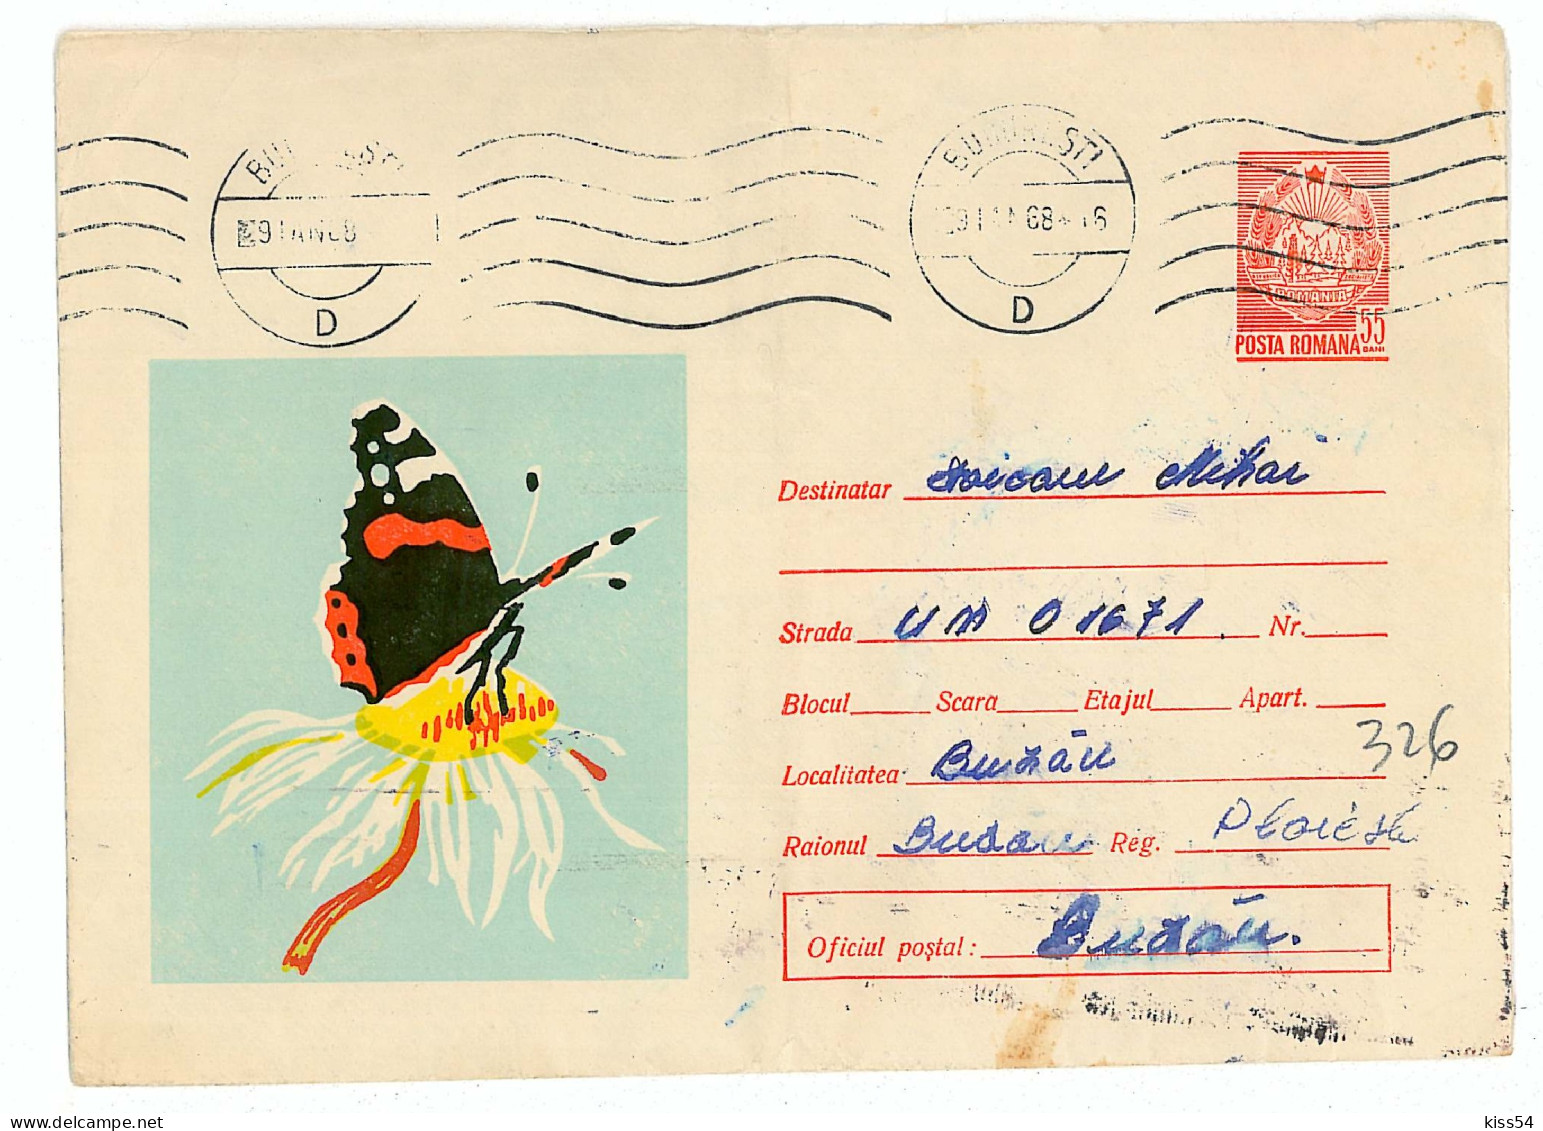 IP 67 - 037a BUTTERFLY, Romania - Stationery - Used - 1967 - Postal Stationery